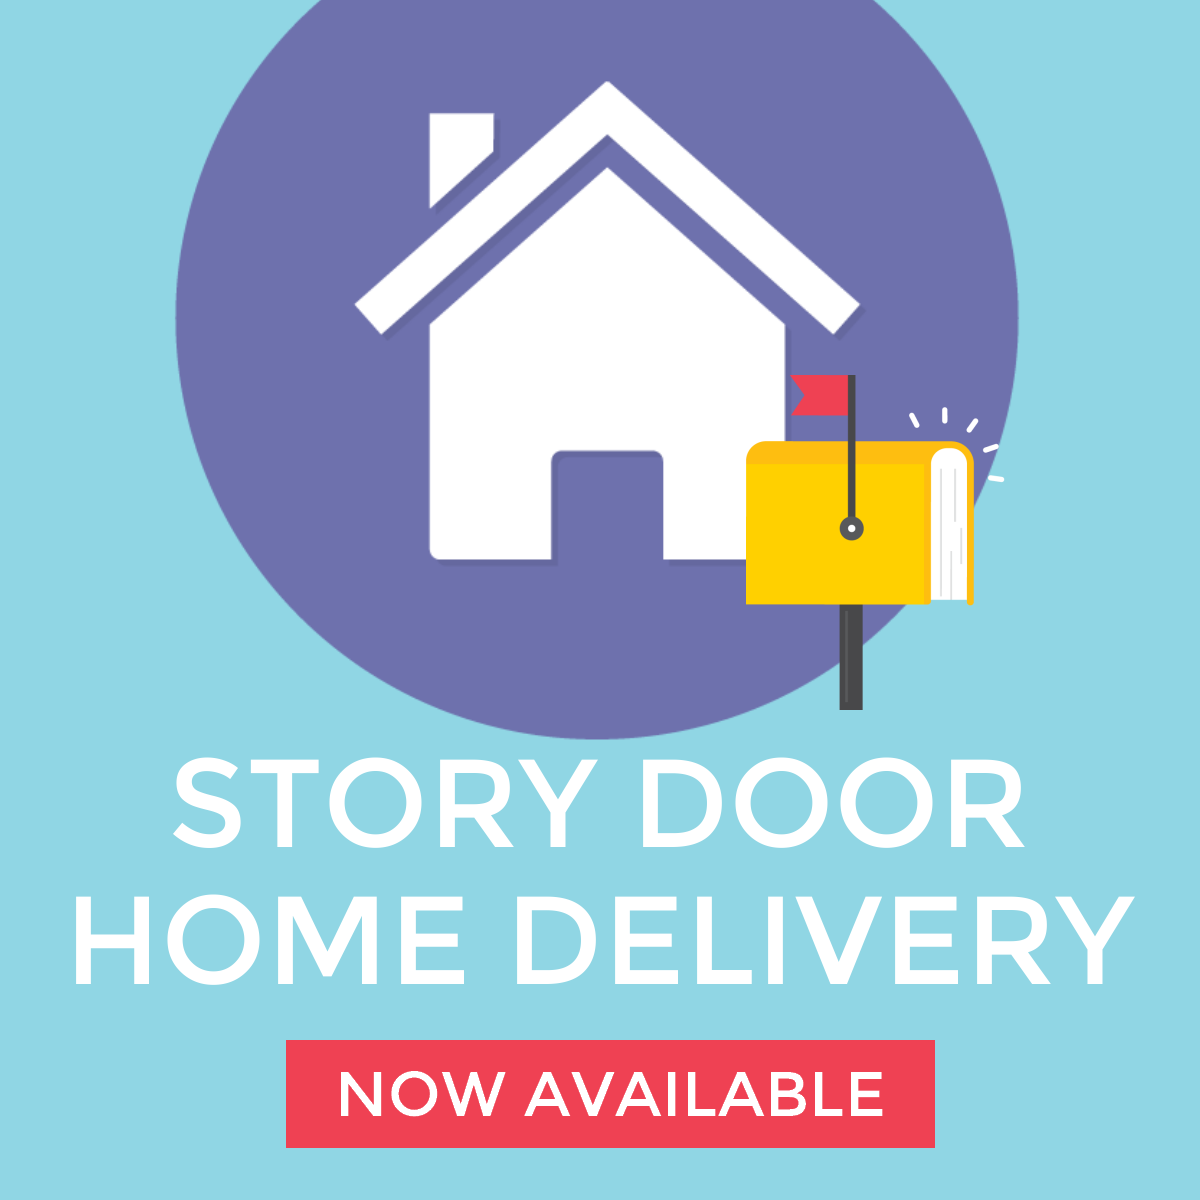 Story Door Home Delivery Now Available